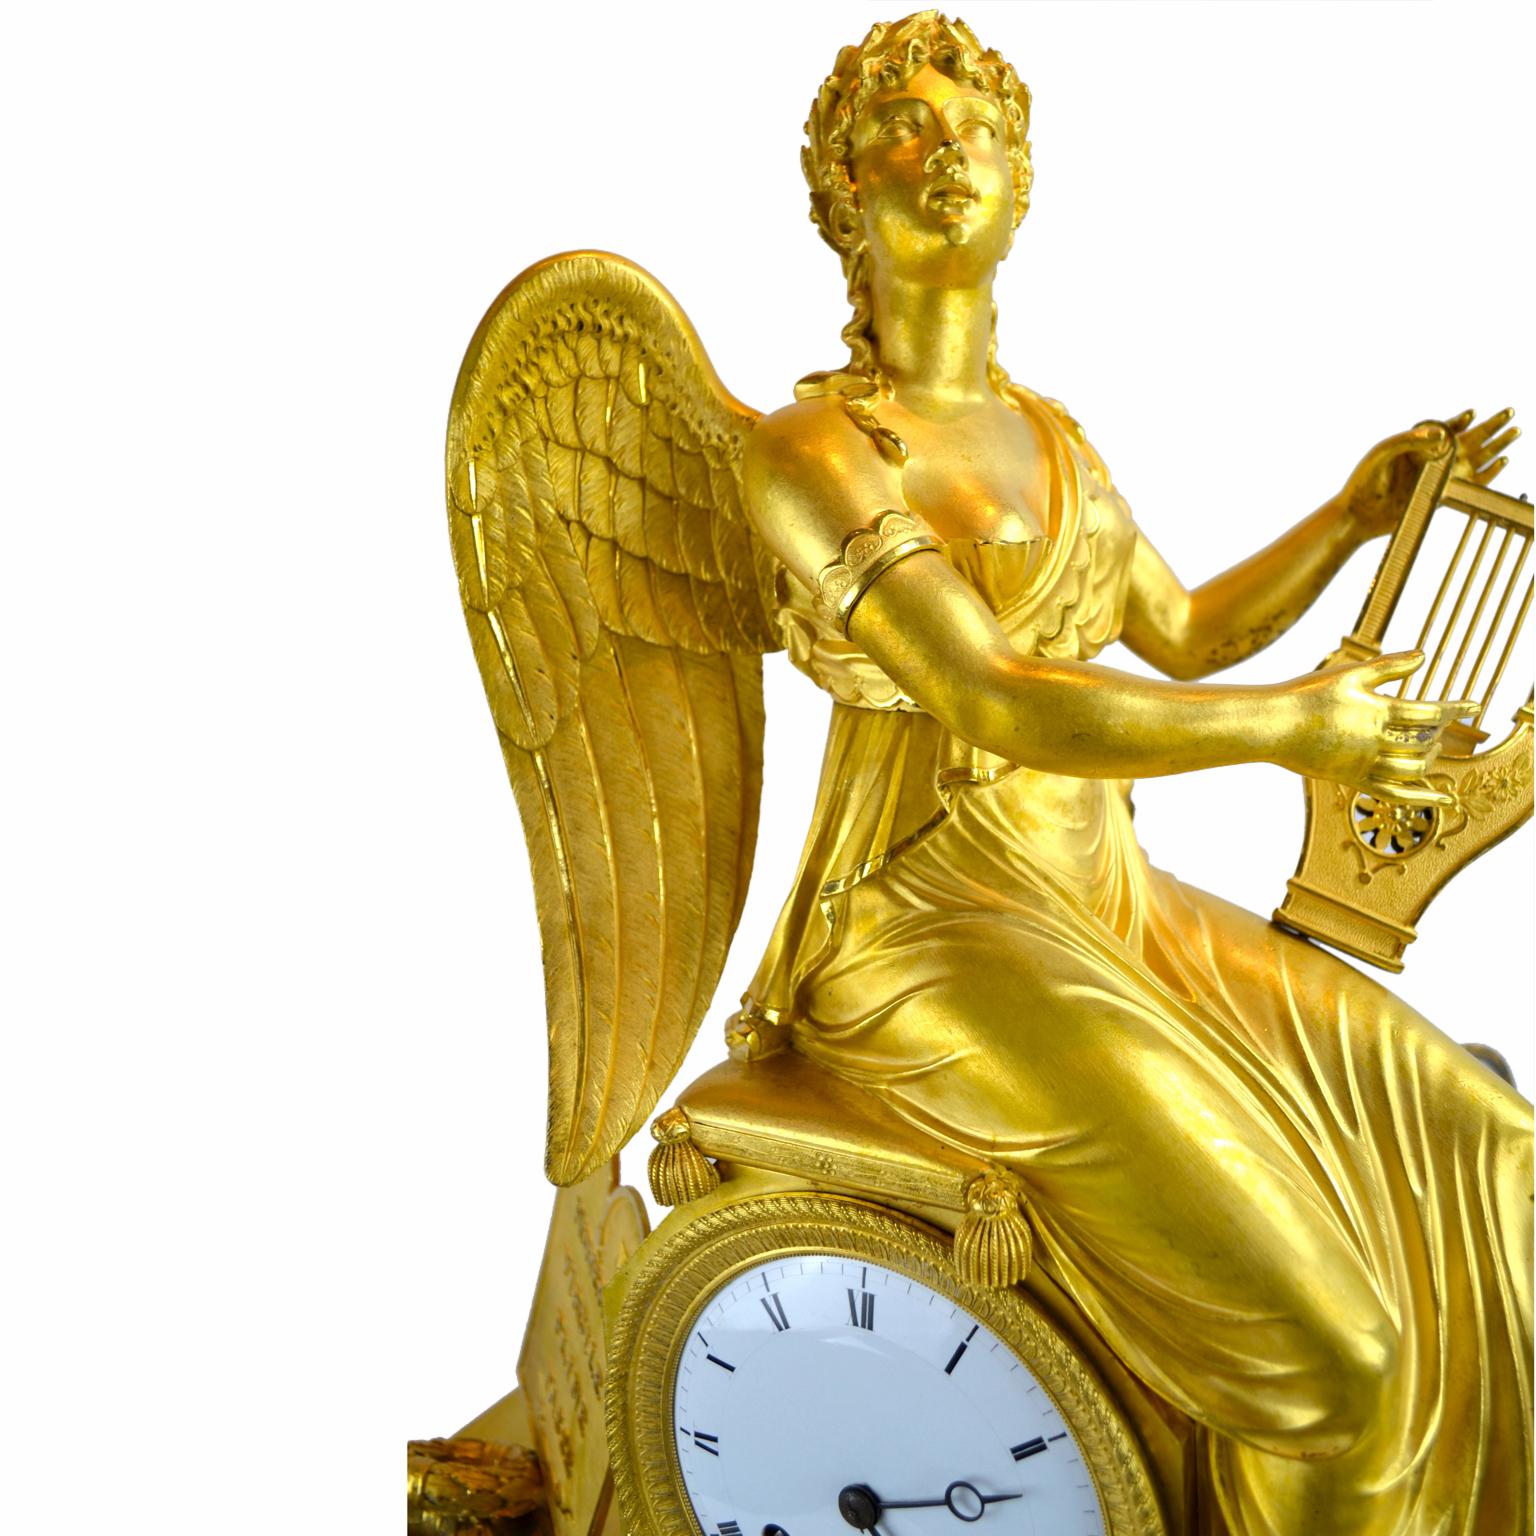 Gilt Bronze French Empire clock depicting an Allegory to Clio, the muse of history and music. In Greek mythology, Clio was the muse of history and of lyre playing. Like all the other nine muses, she is a daughter of Zeus and she counts Urania and